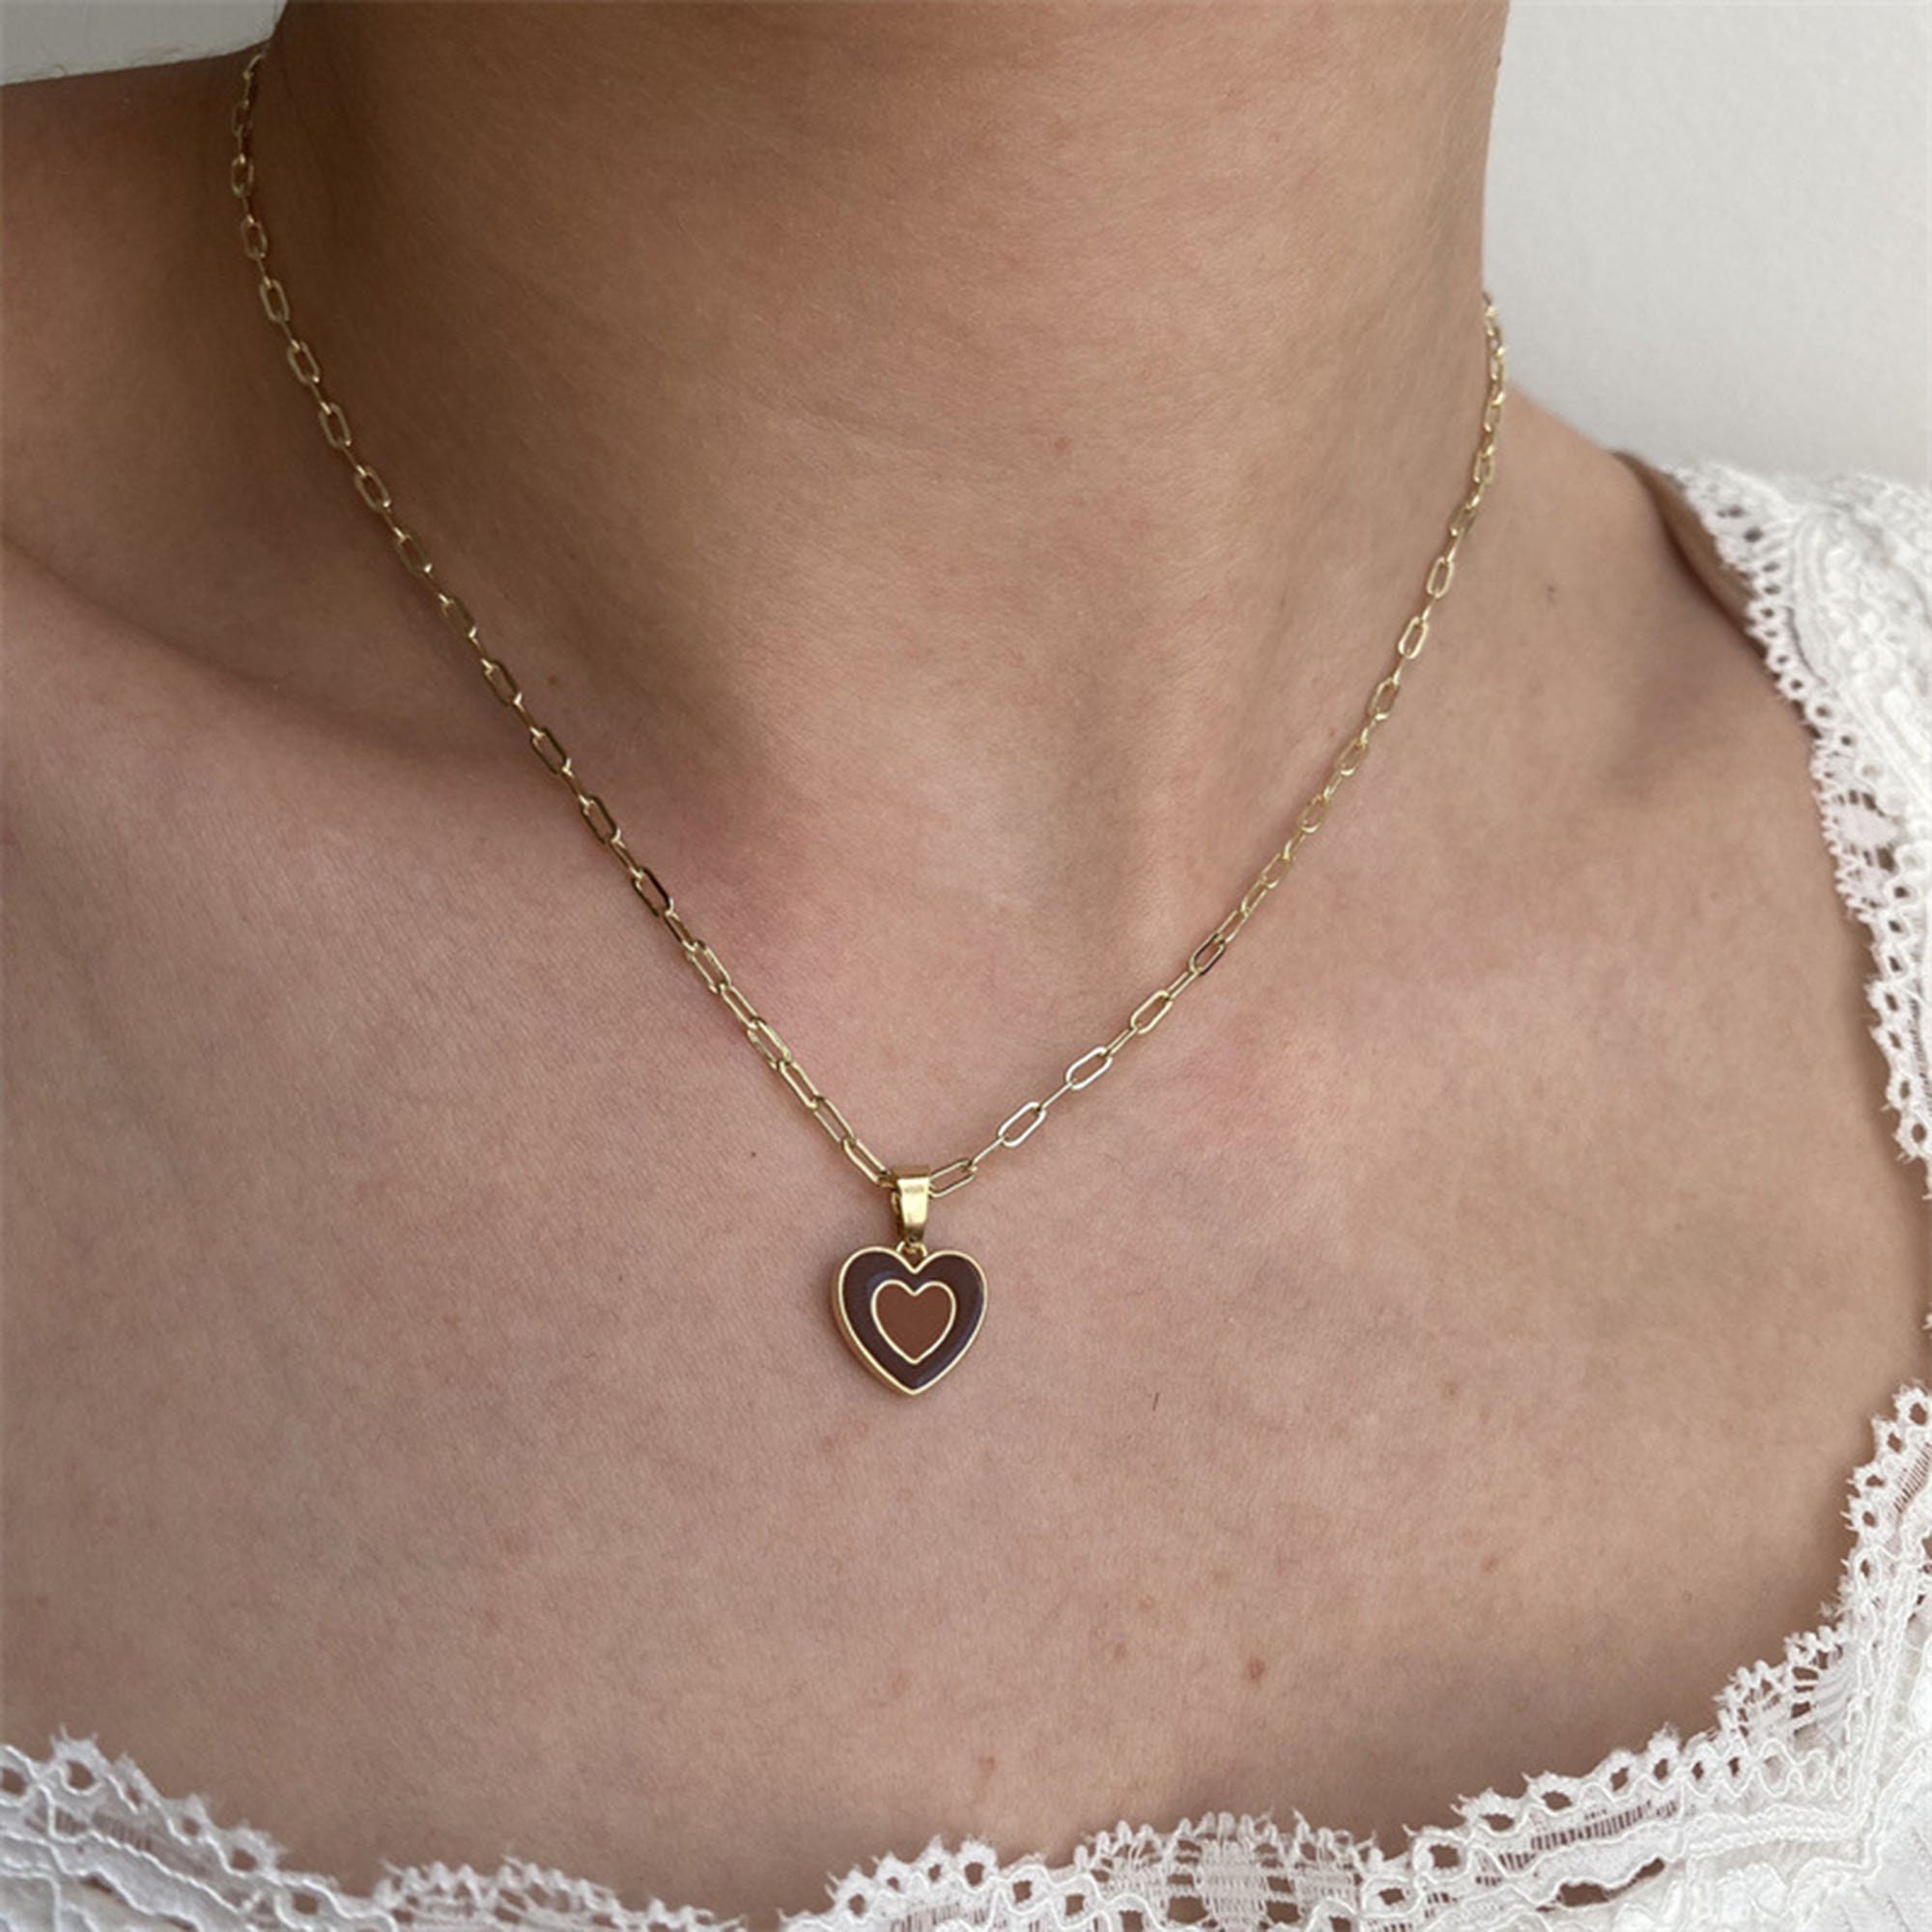 Cute Heart Necklaces for Women Trendy 14K Gold Open Heart Necklace Dainty  Gold Heart Pendant Necklace Aesthetic Jewelry for Teen Girls